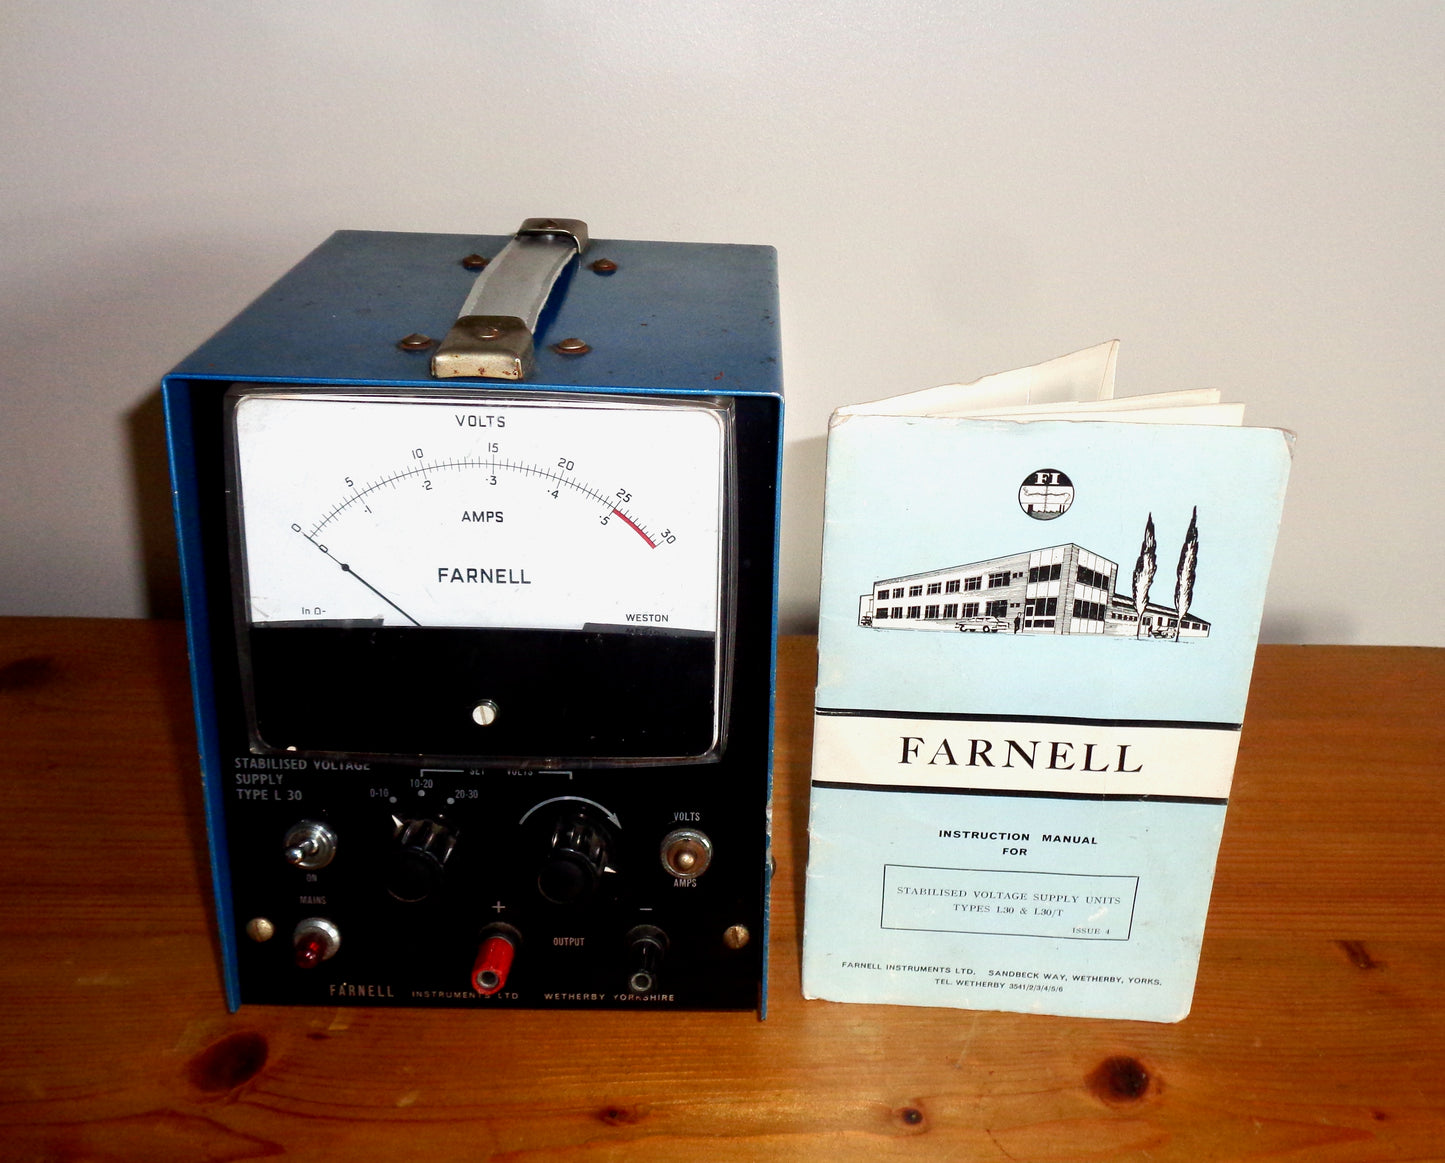 1960s Farnell Instruments Type L30 0.5 Amp / 30 Volts Stabilised Voltage Supply Unit With Instruction Manual